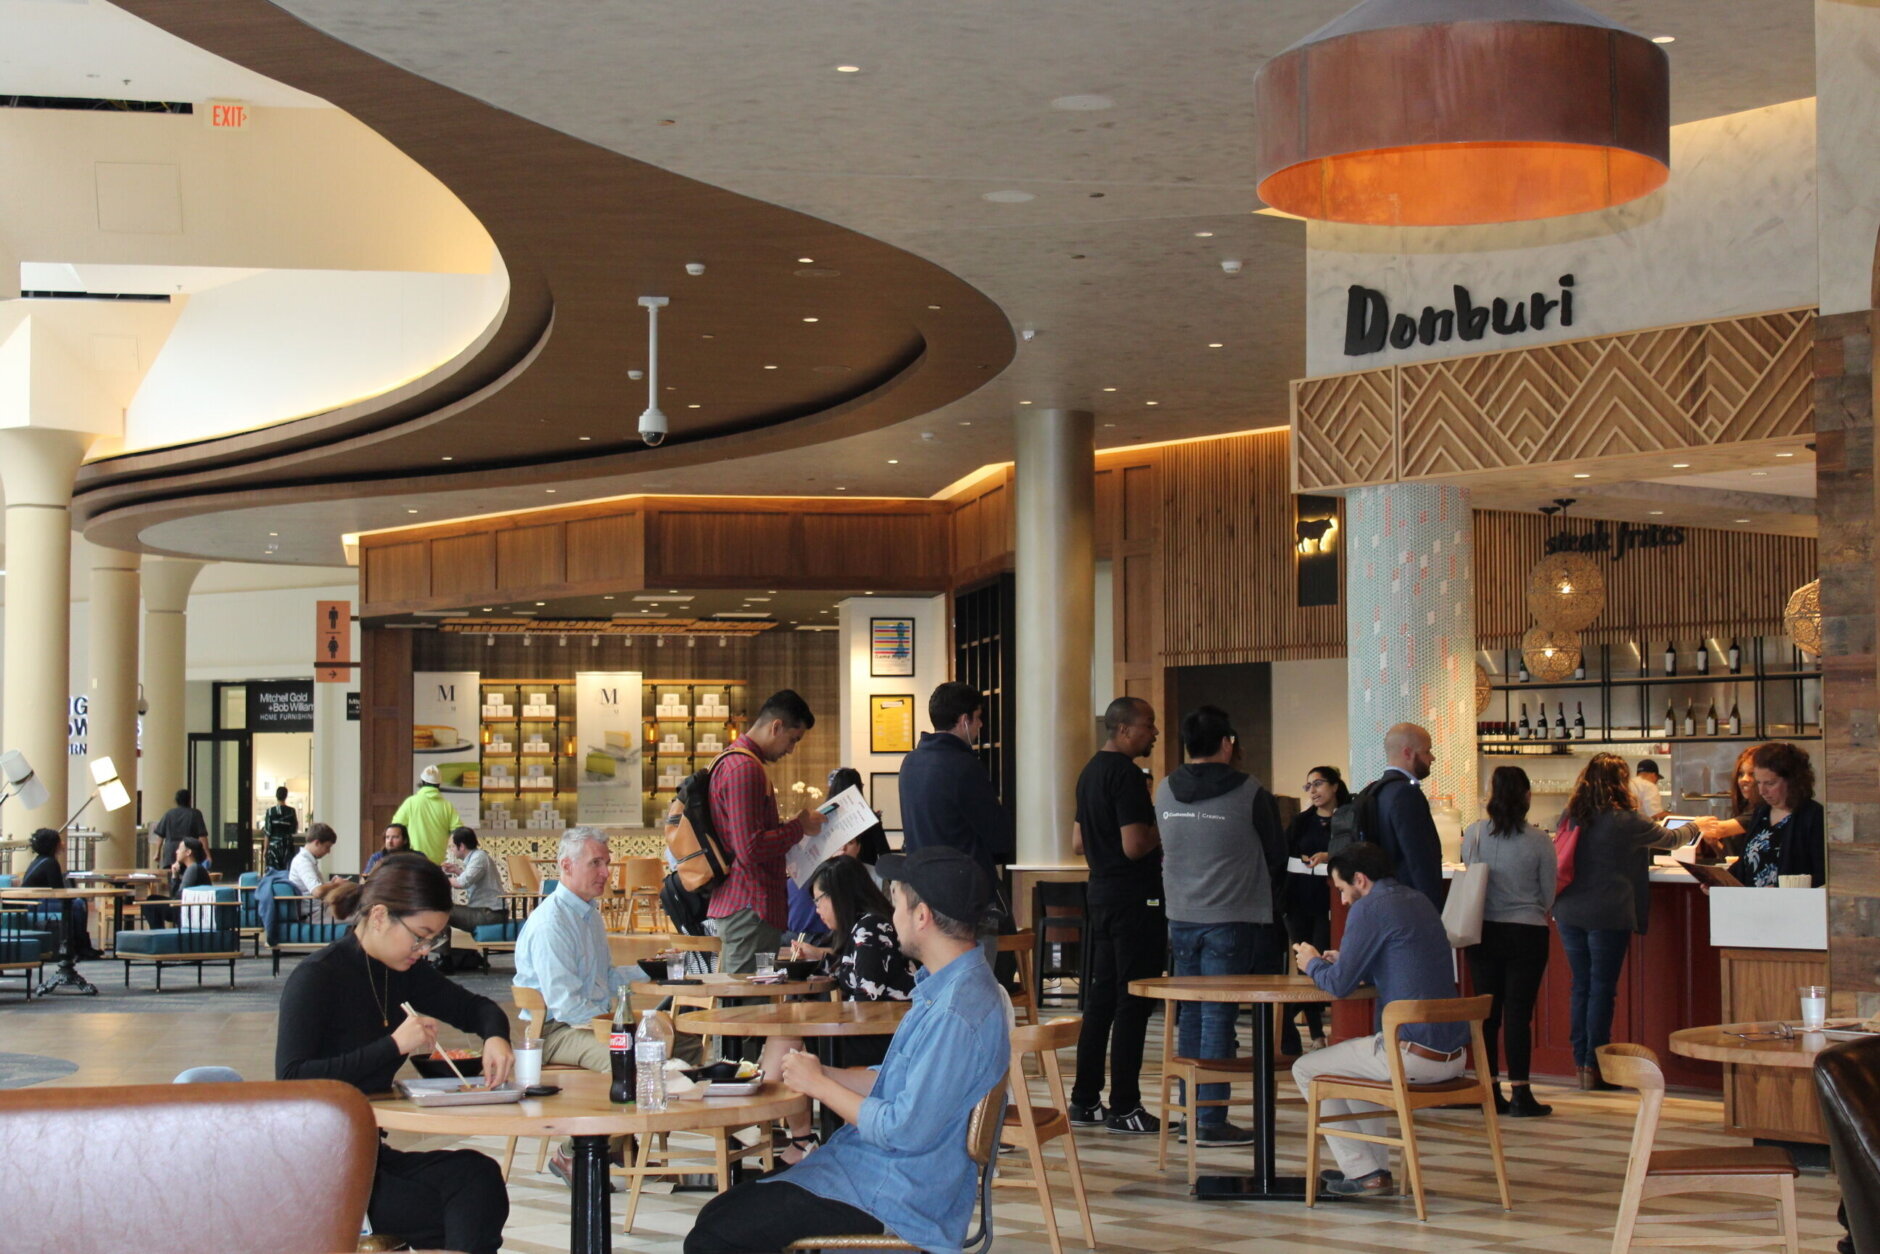 Urbanspace is reopening its Tysons Galleria location. Returning are Andy's Pizza and Donburi. New additions include Empanadas de Mendoza and London Chippy. (Courtesy Urbanspace)